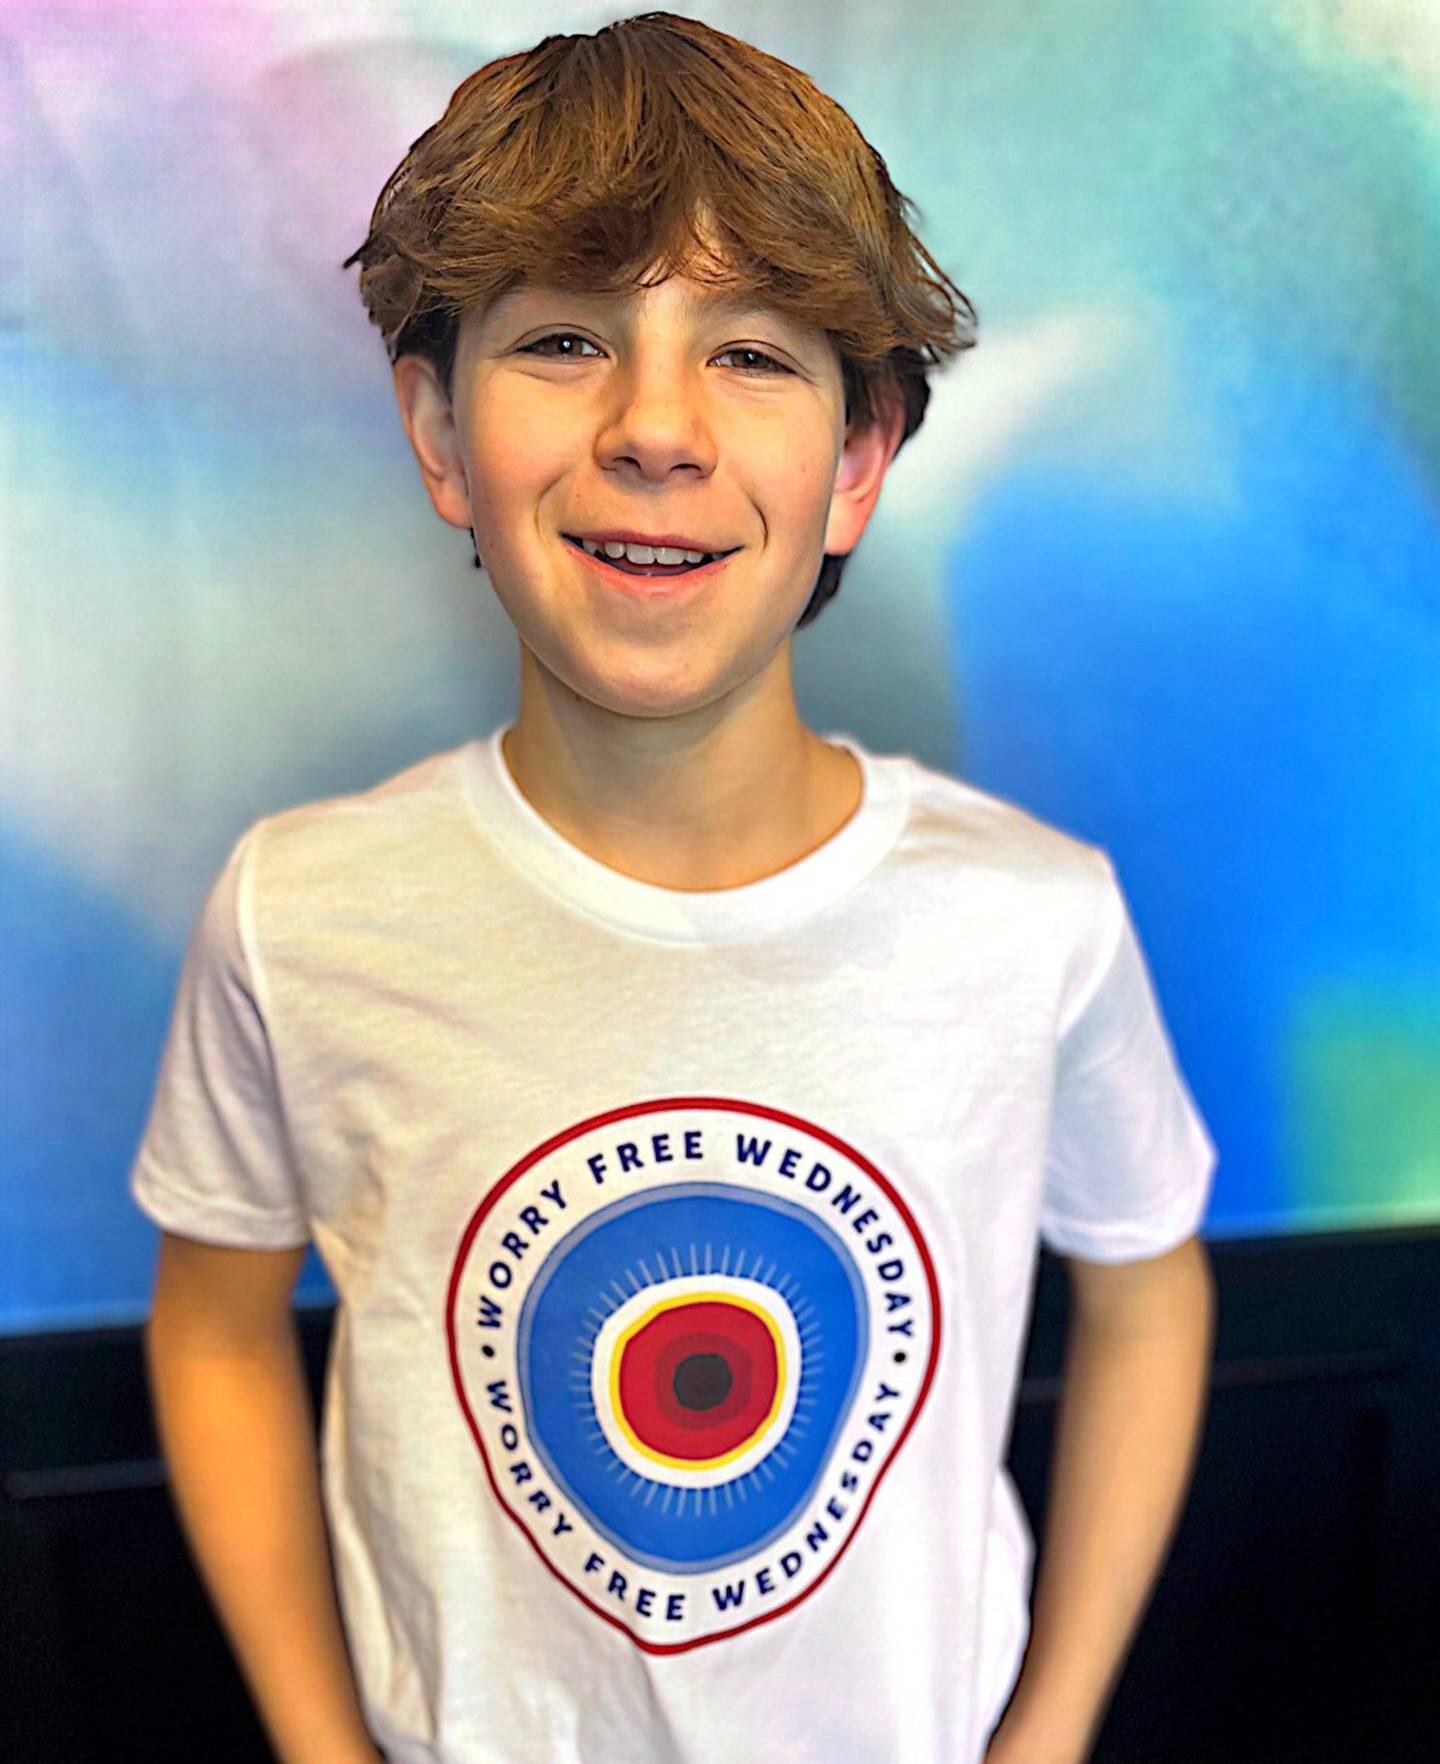 Mason Tepper, 11, of Deerfield, shows off a T-shirt he is selling to raise awareness for mental health.and funds for The Balance Project, an organization that supports mental and emotional wellness.